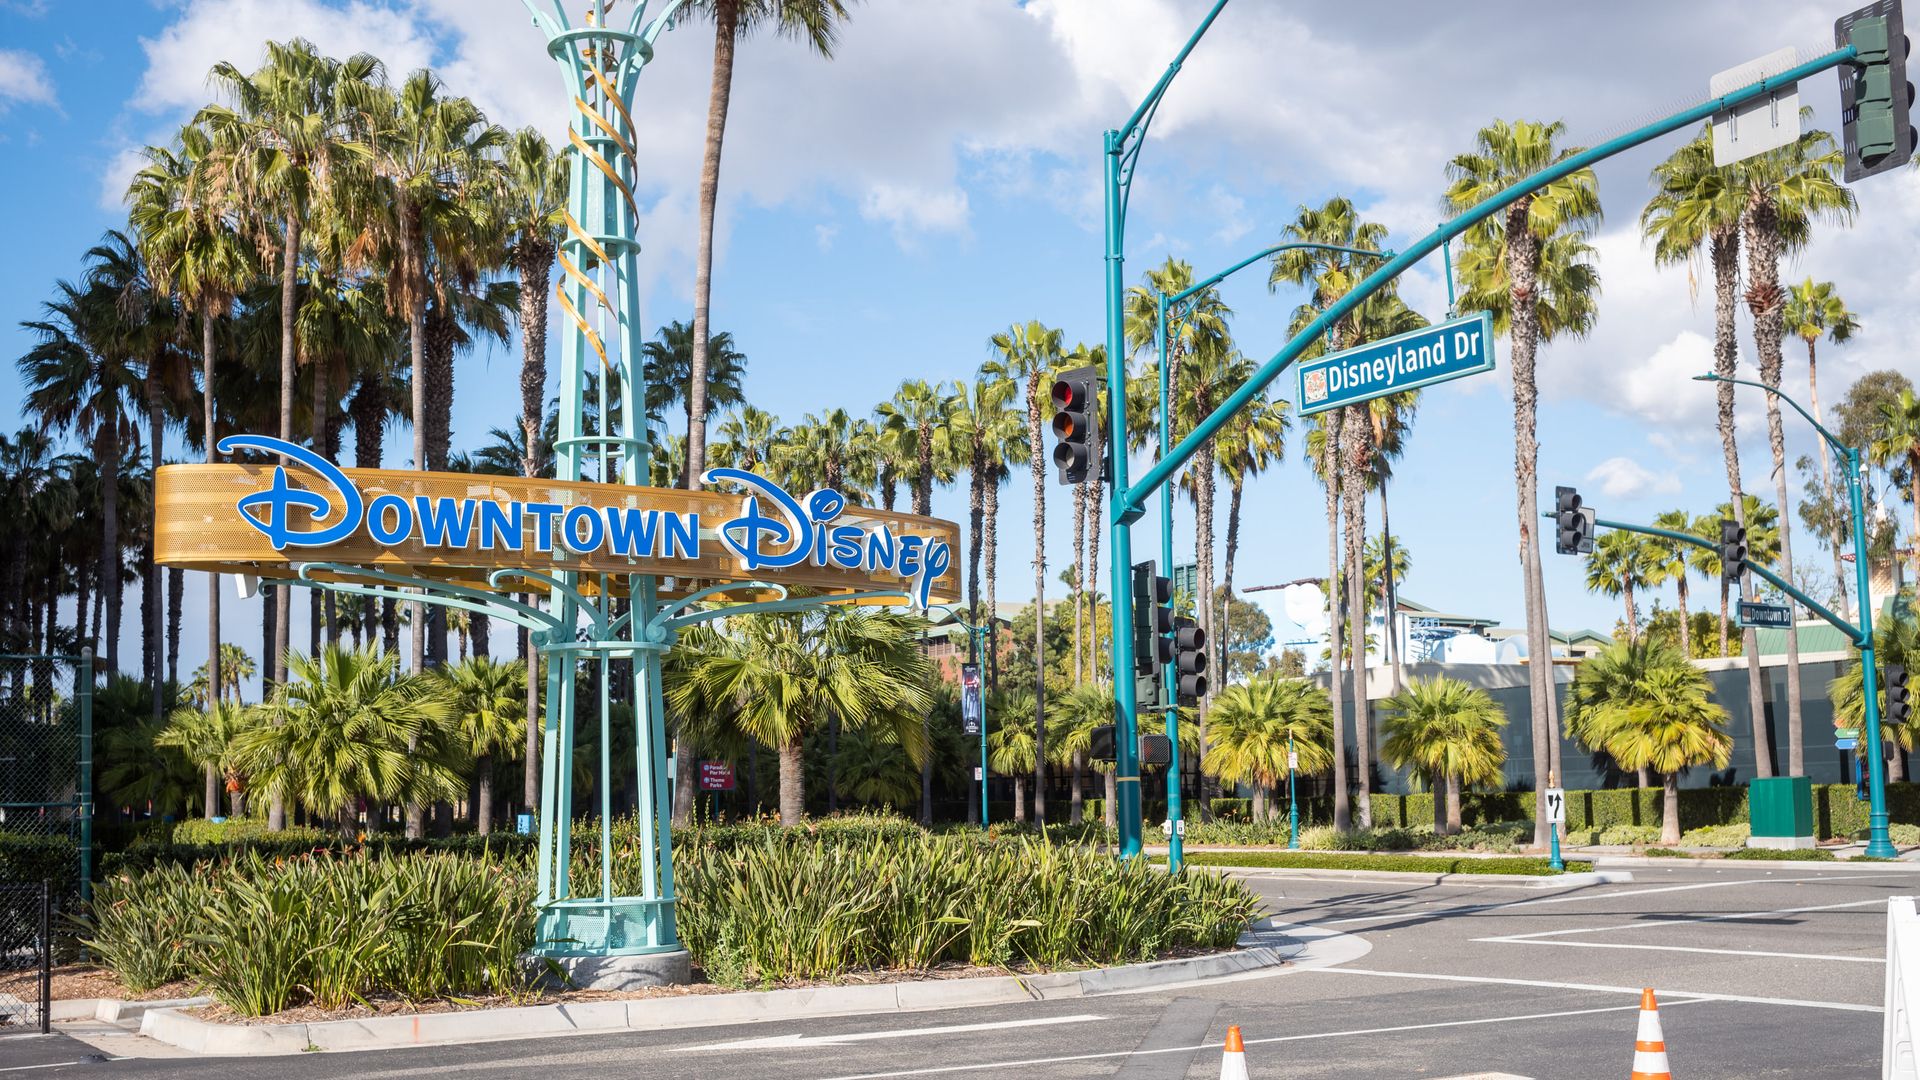 A sign that says "Downtown Disney"